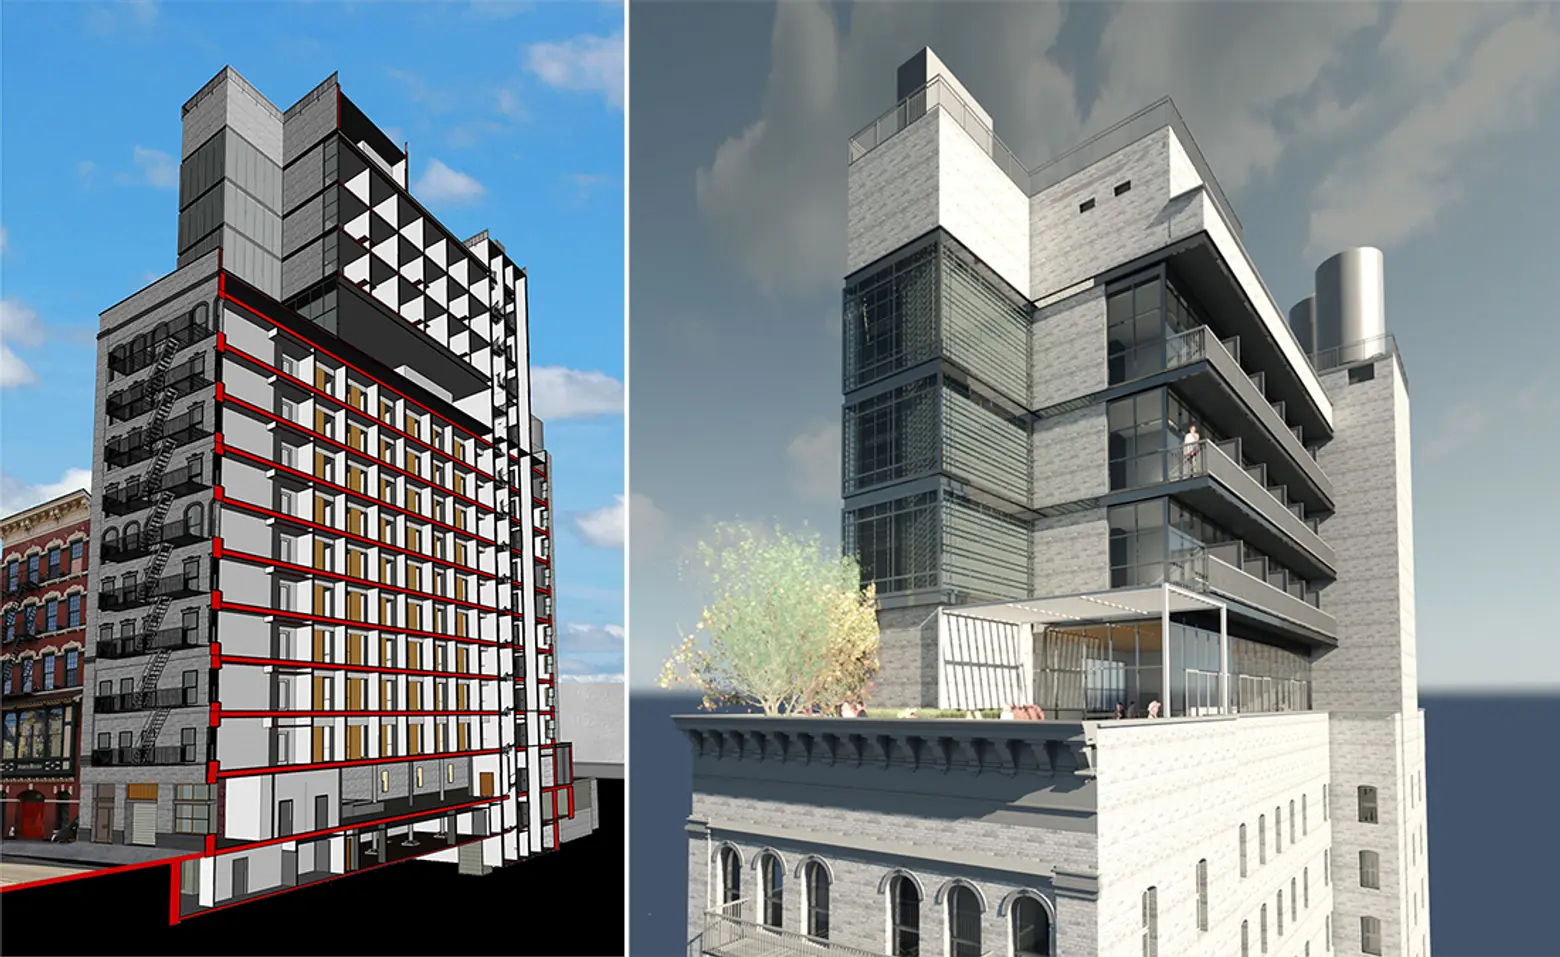 Ace Hotel, HAKS, Salvation Army, North Wind Development Group, Omnia Group, 223-225 Bowery